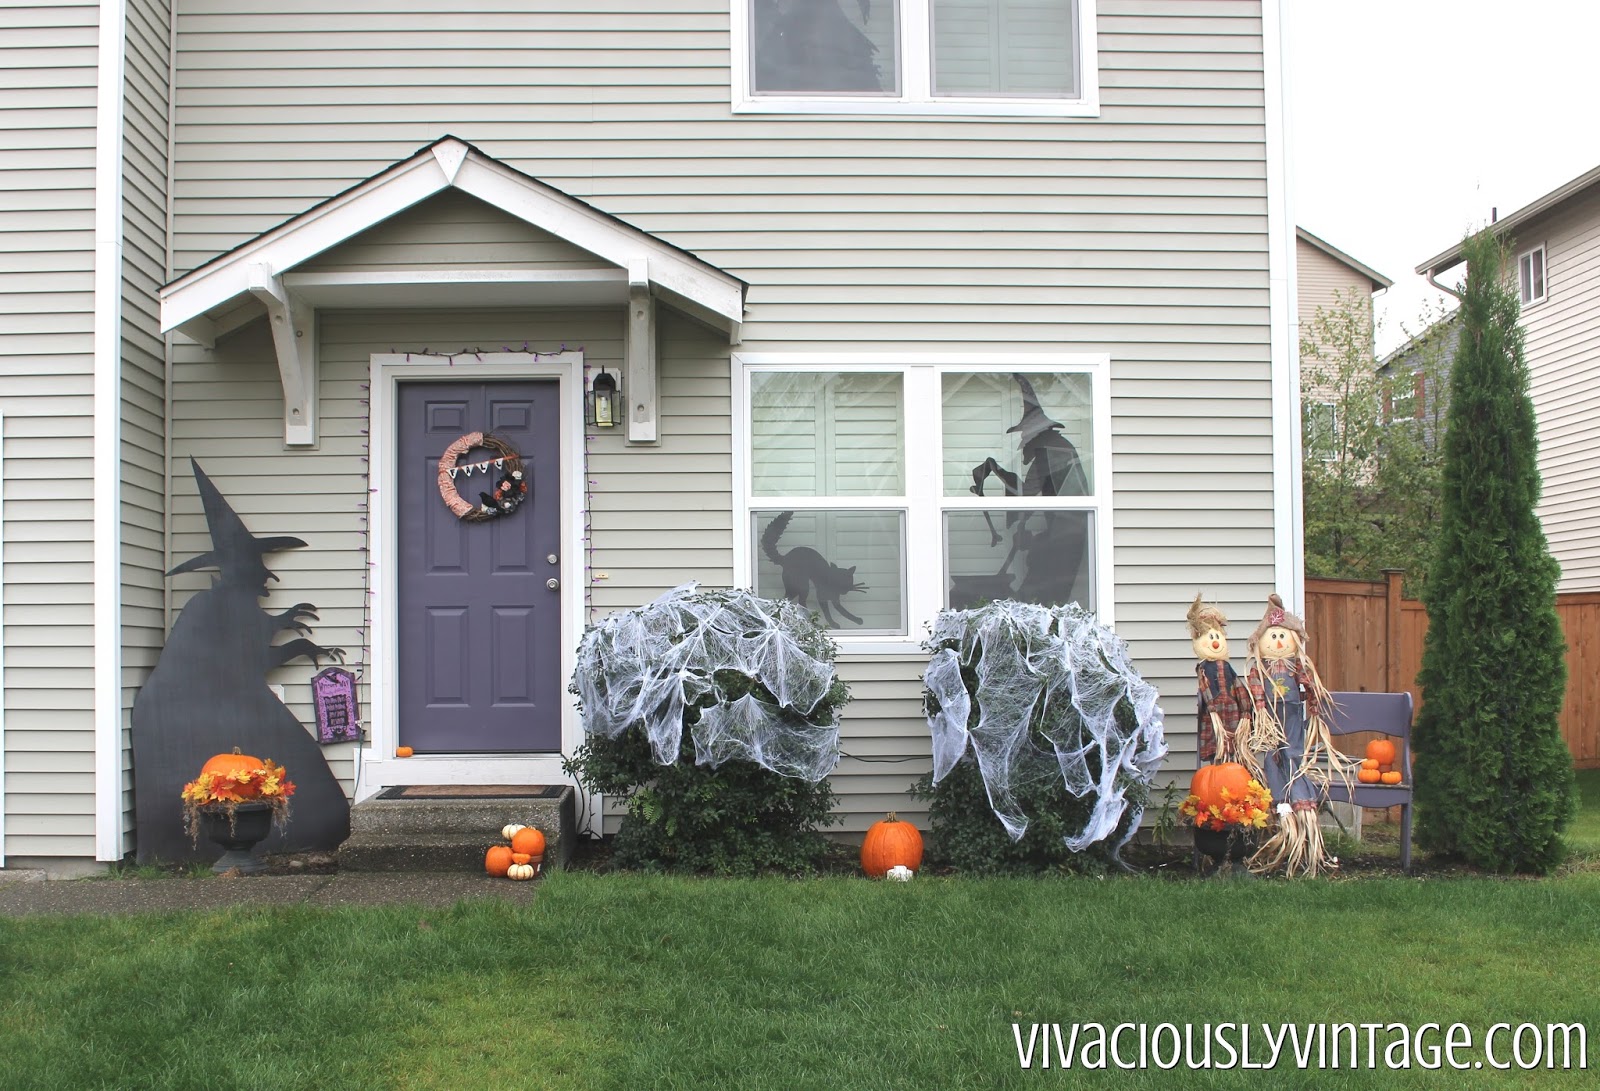 Want cheap Halloween decor? Make your own creepy Halloween window silhouettes using these FREE templates! Link to a full tutorial in the post! Pin now to make later!